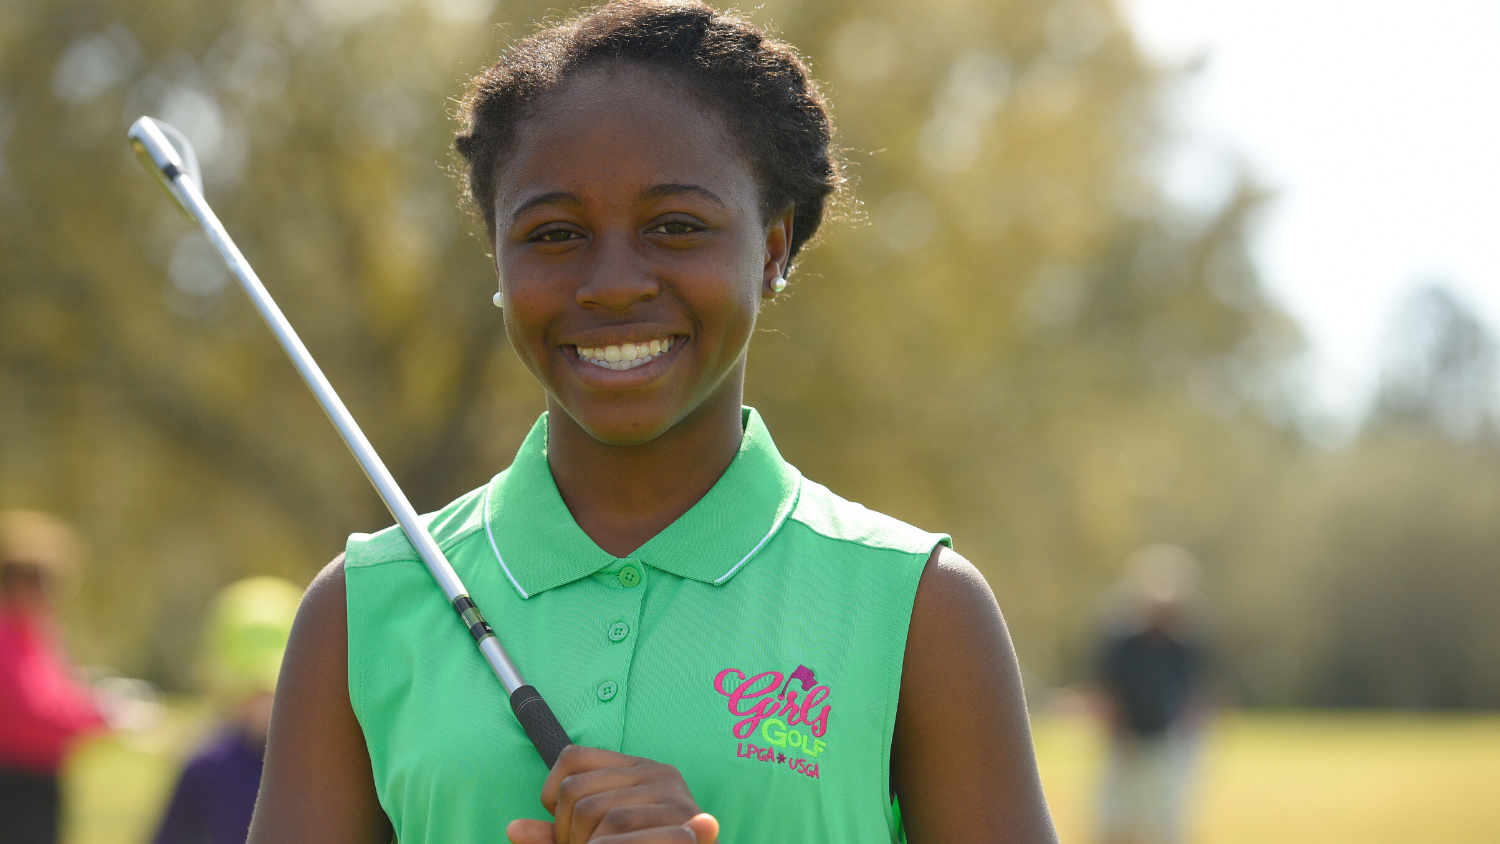 There Are A Multitude of Golf Opportunities For Juniors